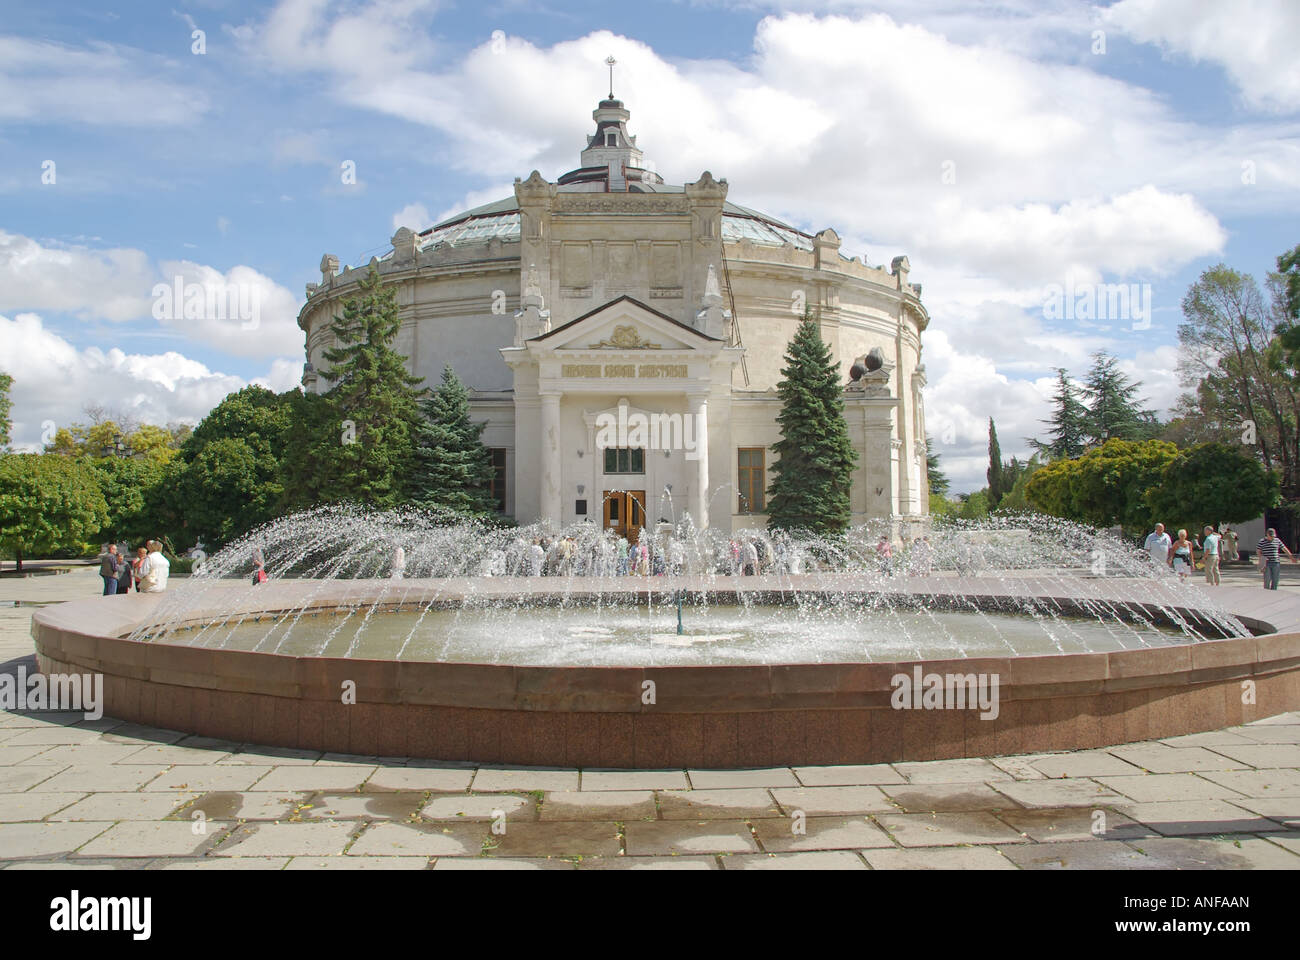 Fountain front of Sevastopol circular Panorama Museum & tourism exhibit of paintings & models of the cities defence during Crimean War Crimea Ukraine Stock Photo